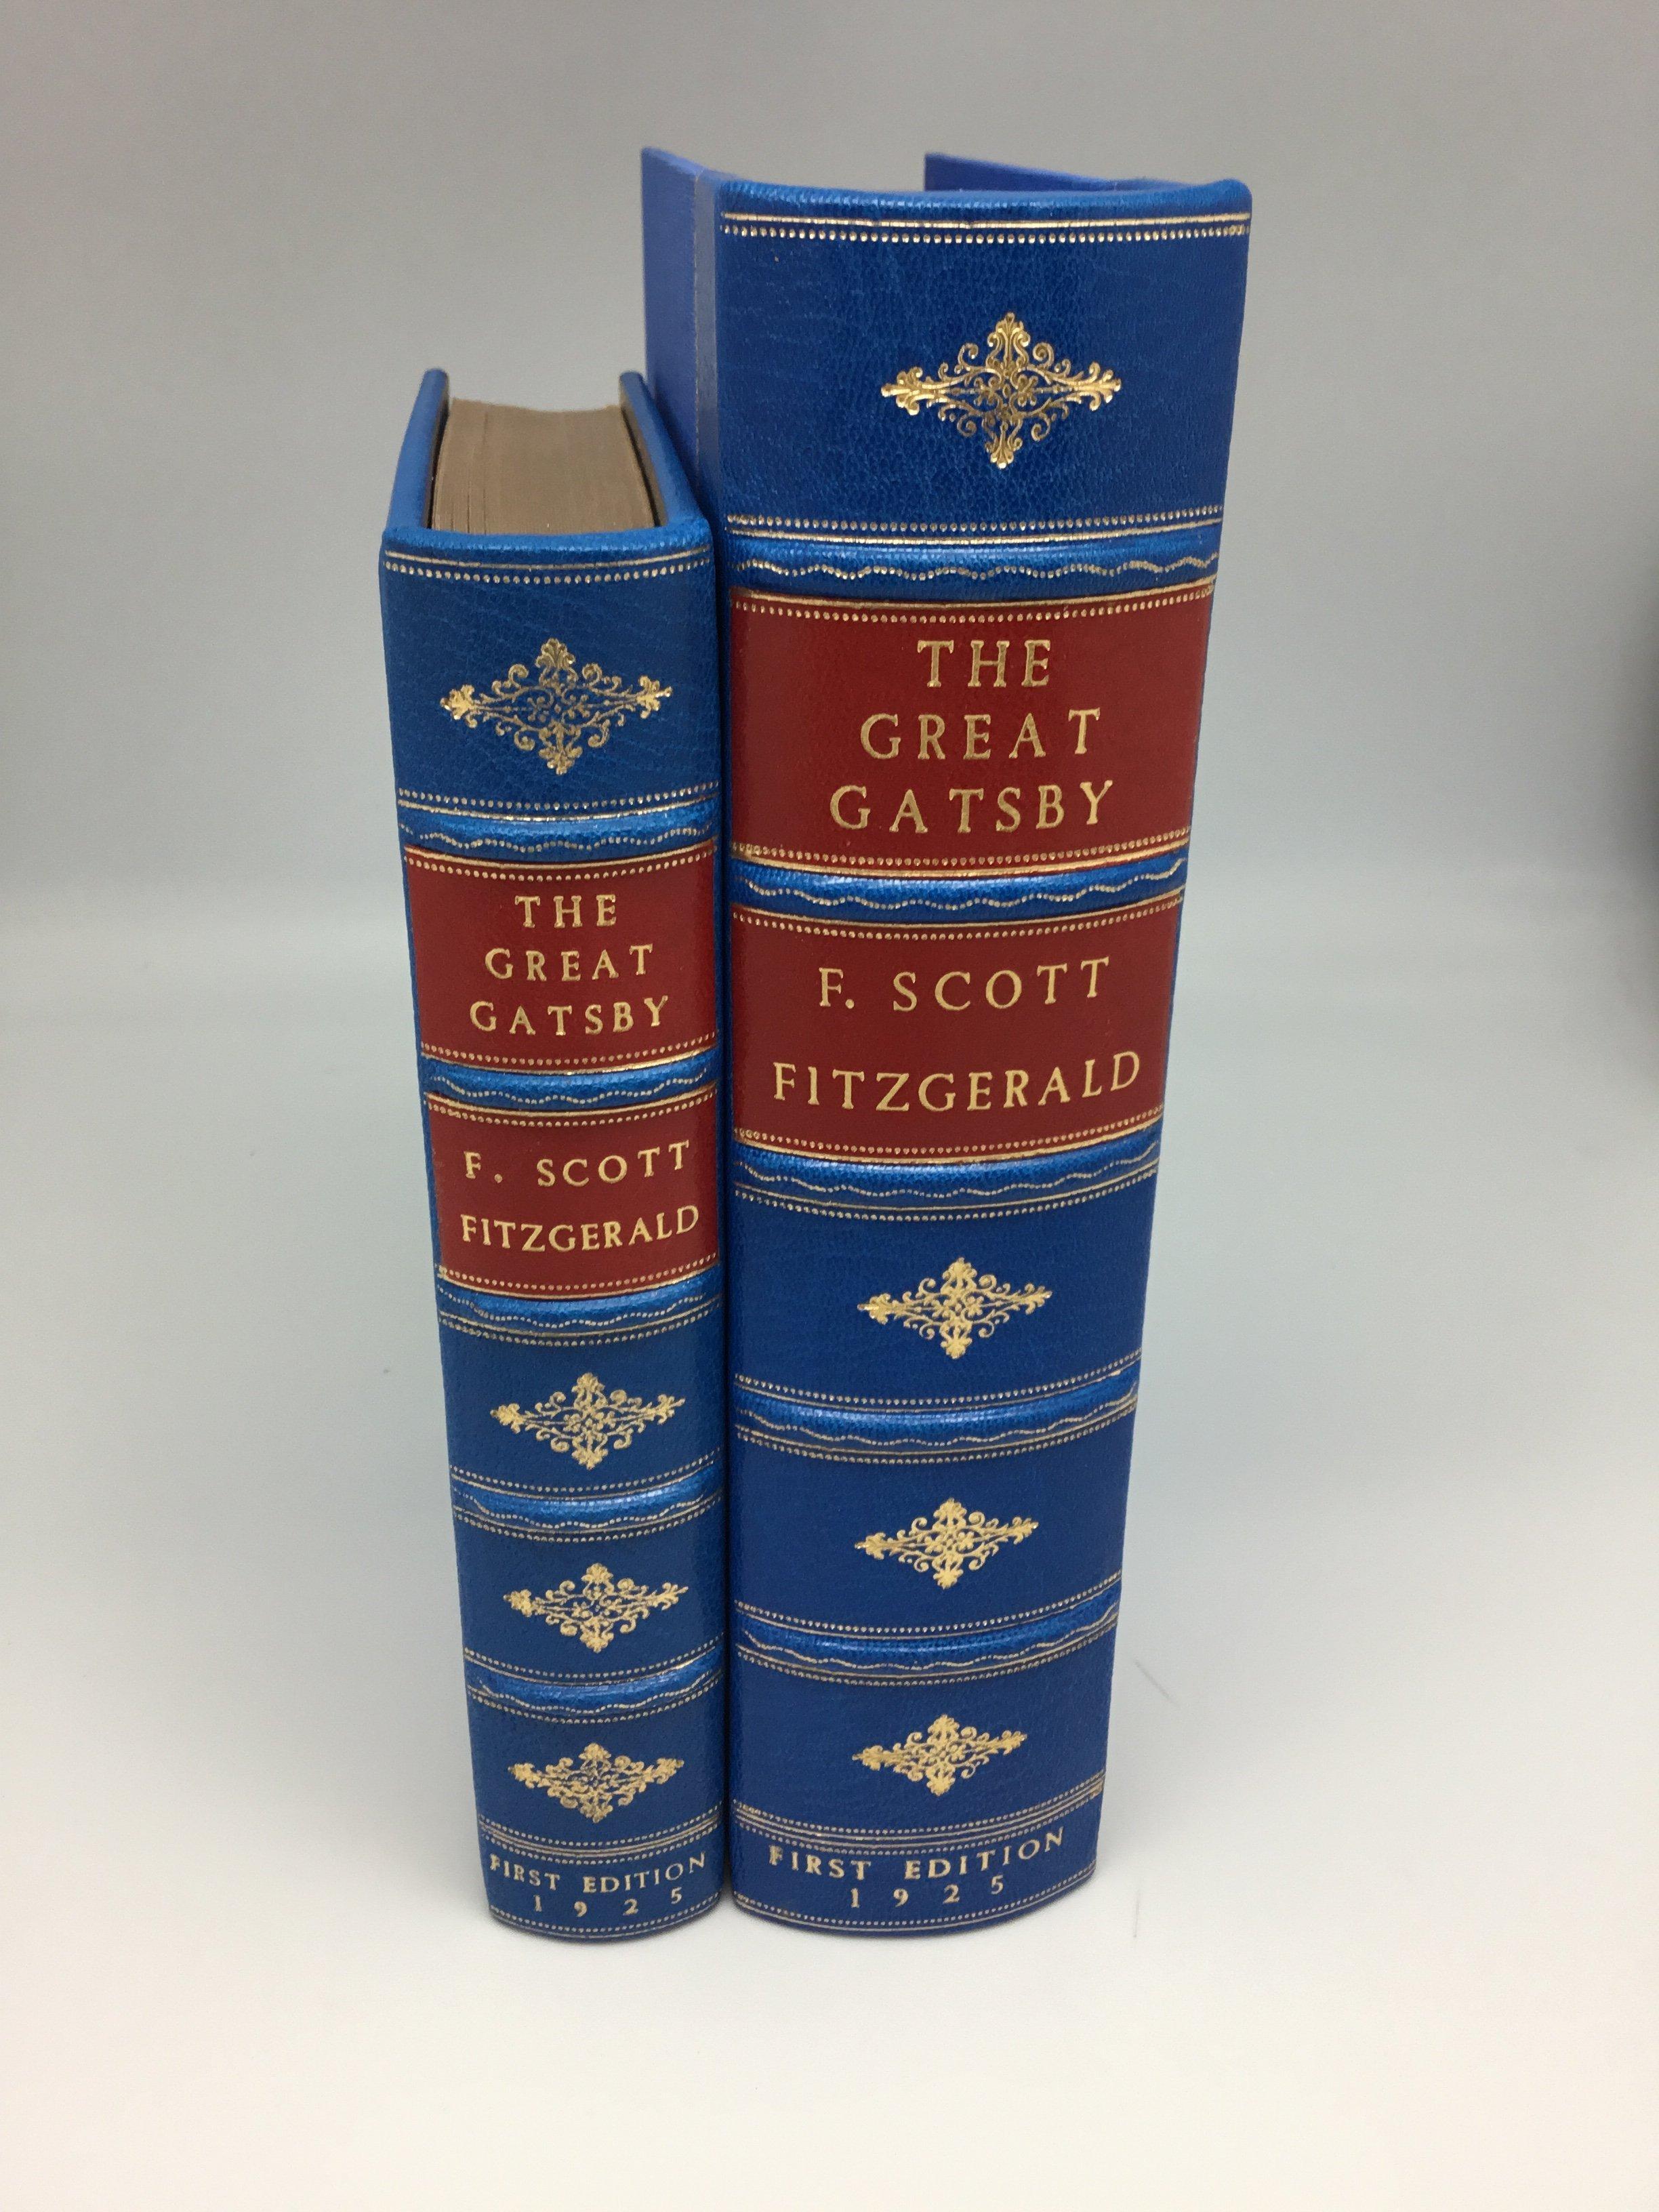 Fitzgerald, F. Scott, The Great Gatsby. New York: Charles Scribner’s Sons, 1925. First edition, first printing. Bound in full blue morocco leather with gilt tooling and matching leather and cloth clamshell.

First edition, first issue of F. Scott